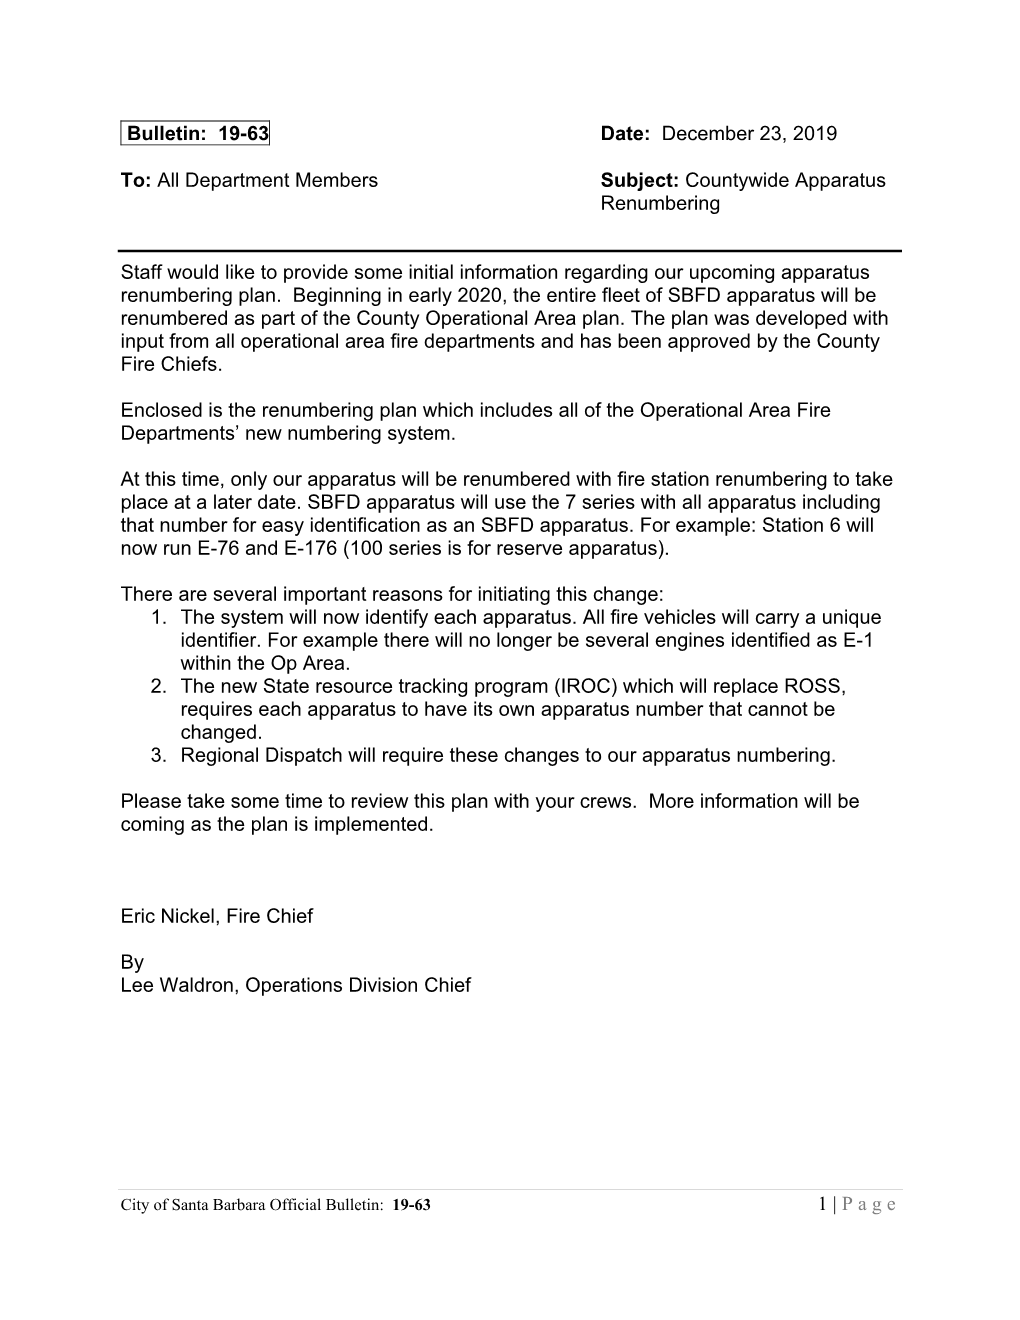 1 | P a G E Bulletin: 19-63 Date: December 23, 2019 To: All Department Members Subject: Countywide Apparatus Renumbering Staff